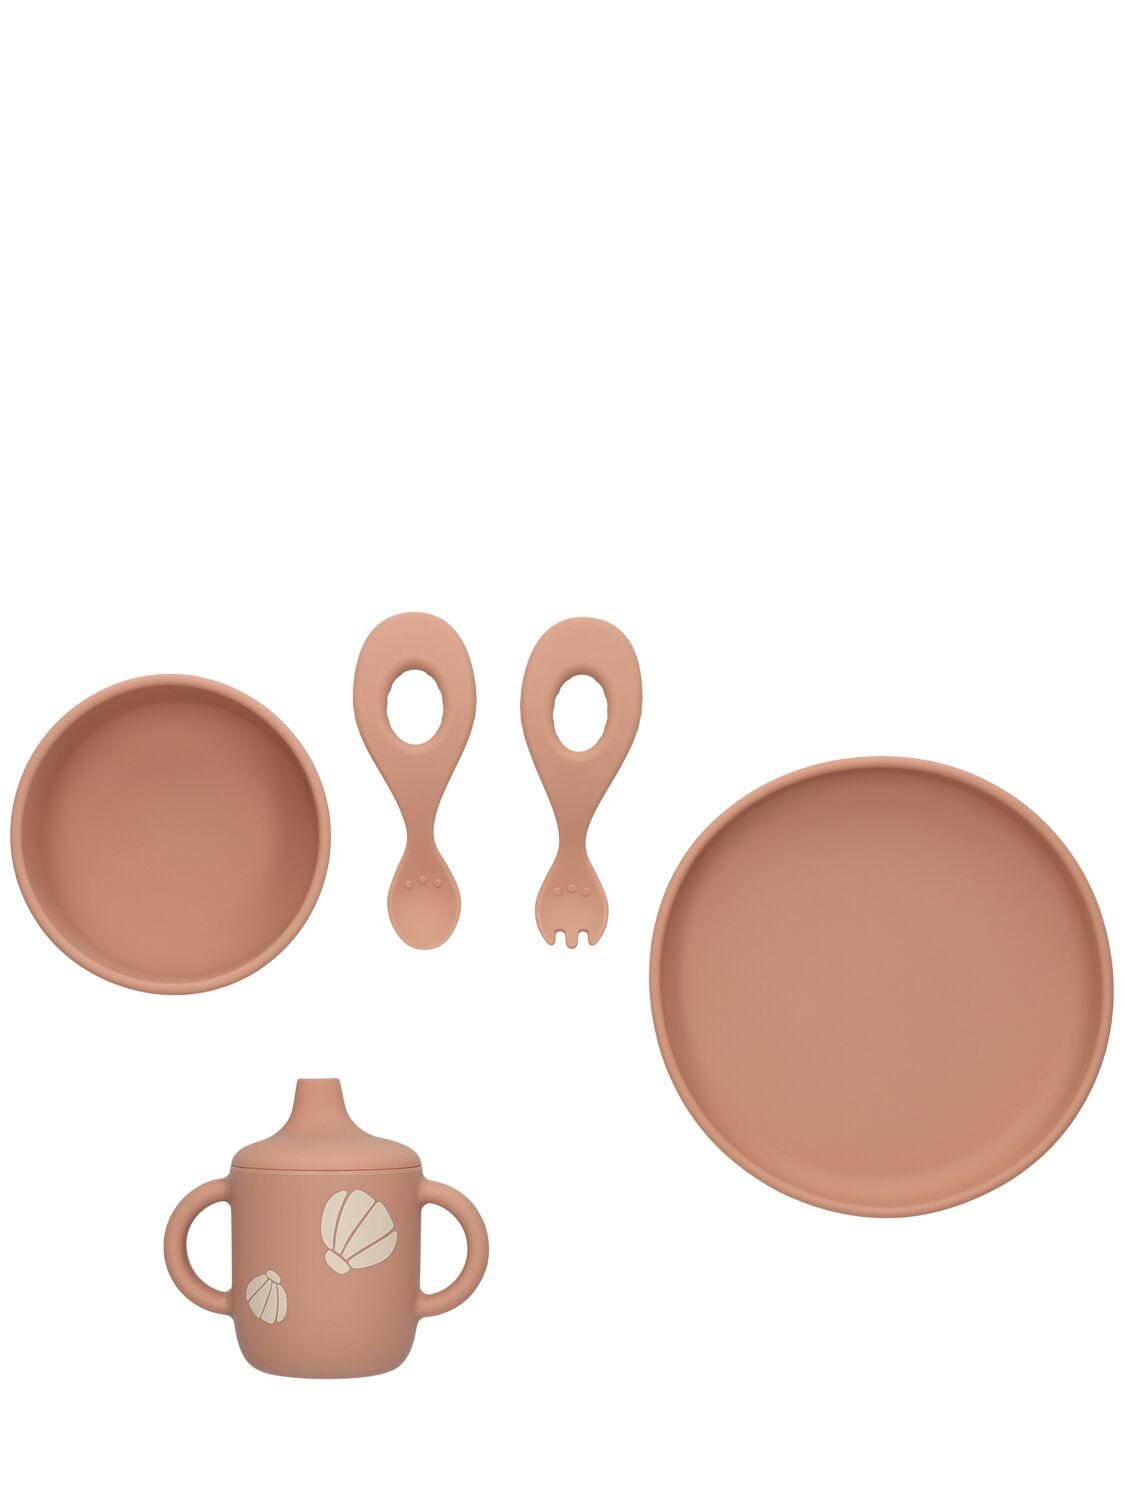 Shell Print Silicone Tableware Set by LIEWOOD